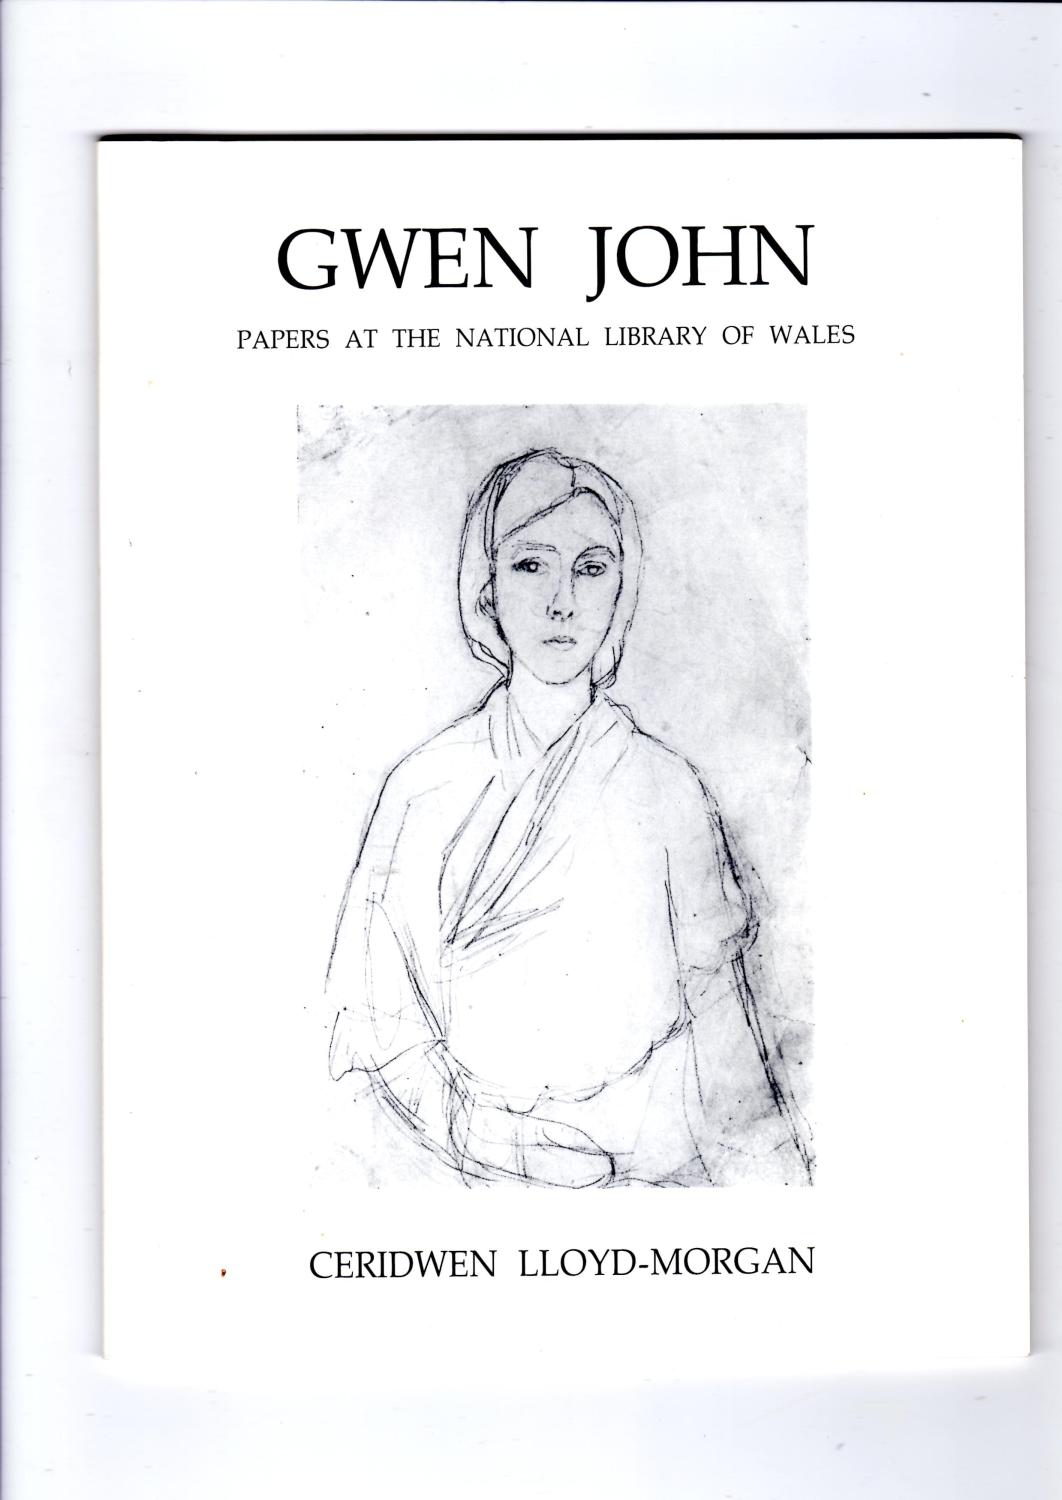 Gwen John papers at the National Library of Wales